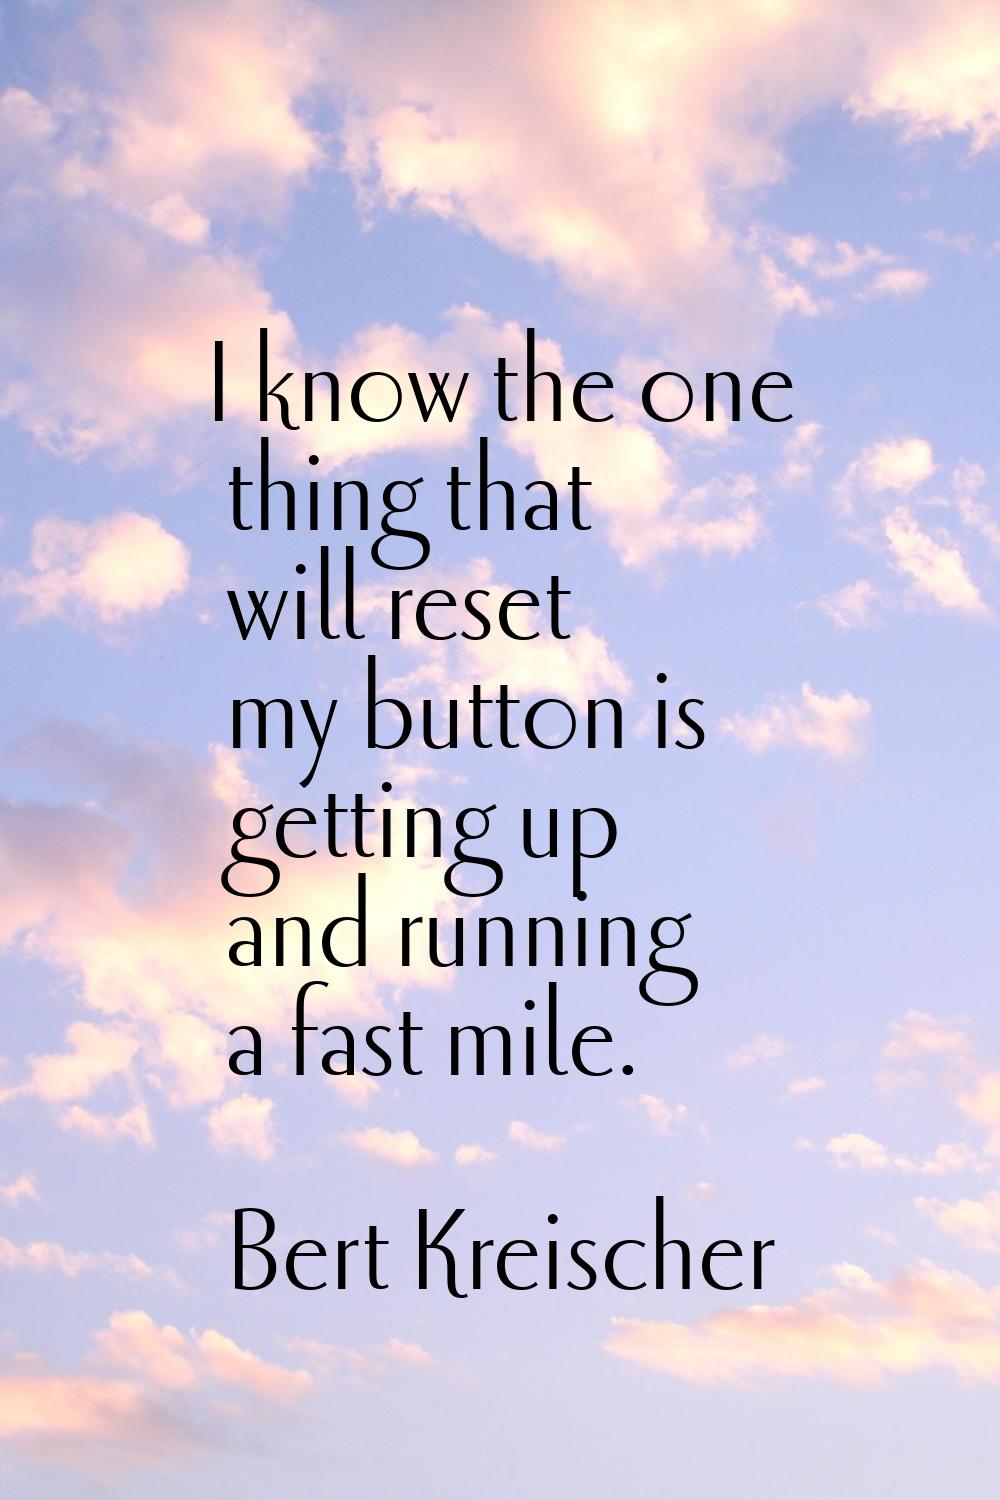 I know the one thing that will reset my button is getting up and running a fast mile.